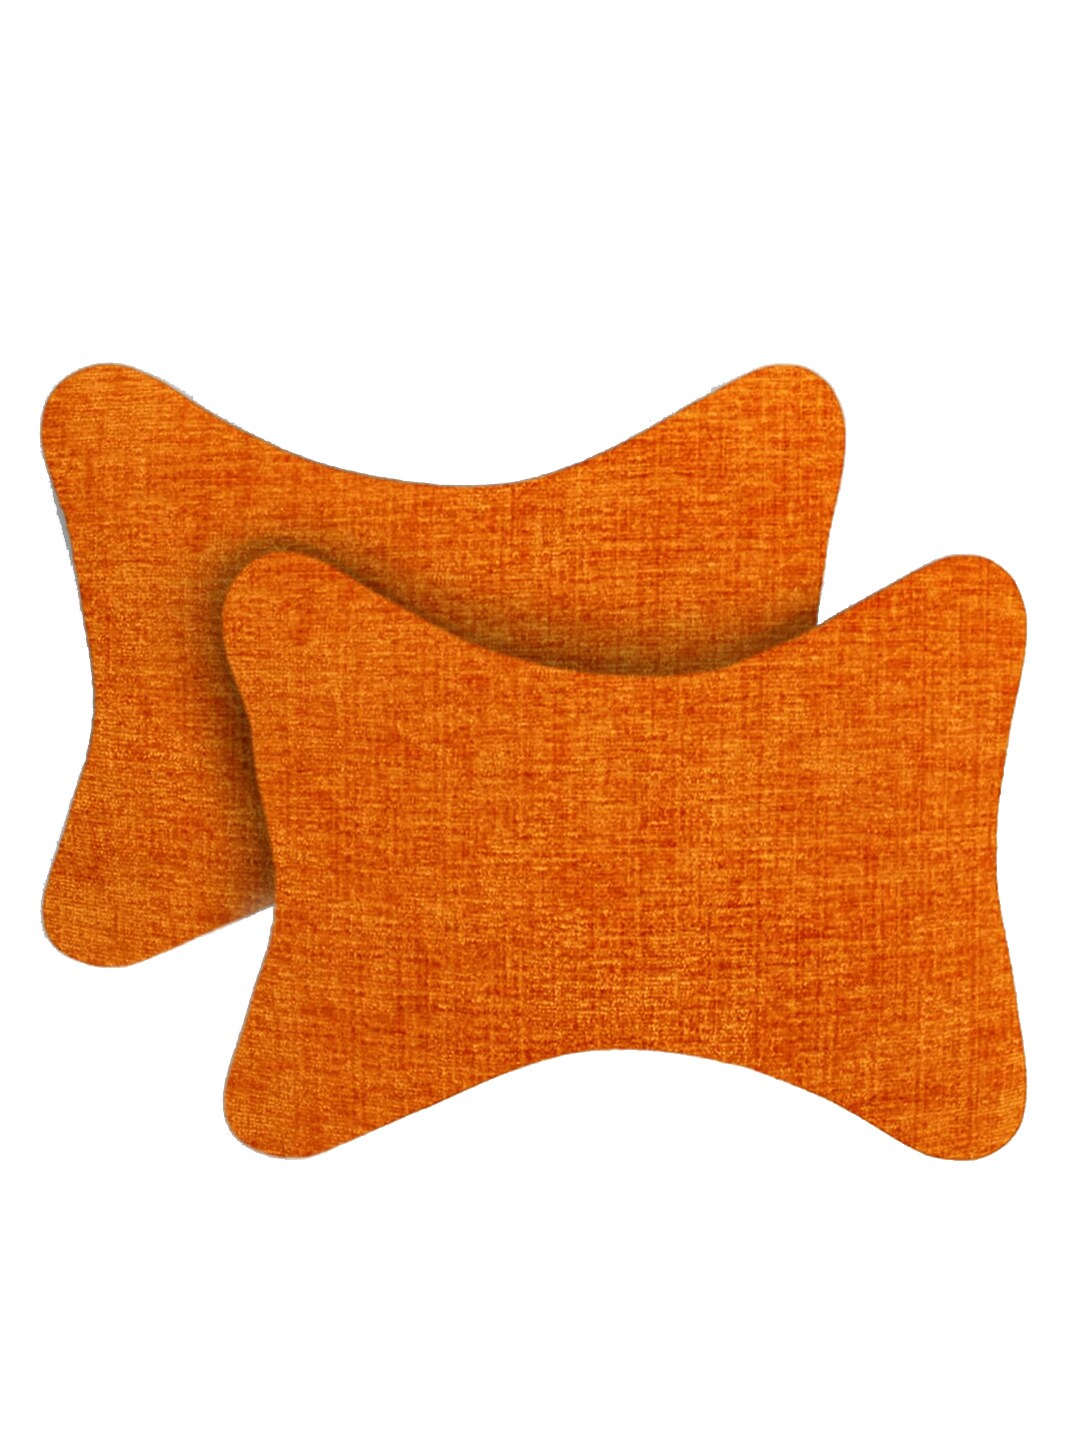 Lushomes Orange Set of 2 Neck & Back Rest Pillows Price in India